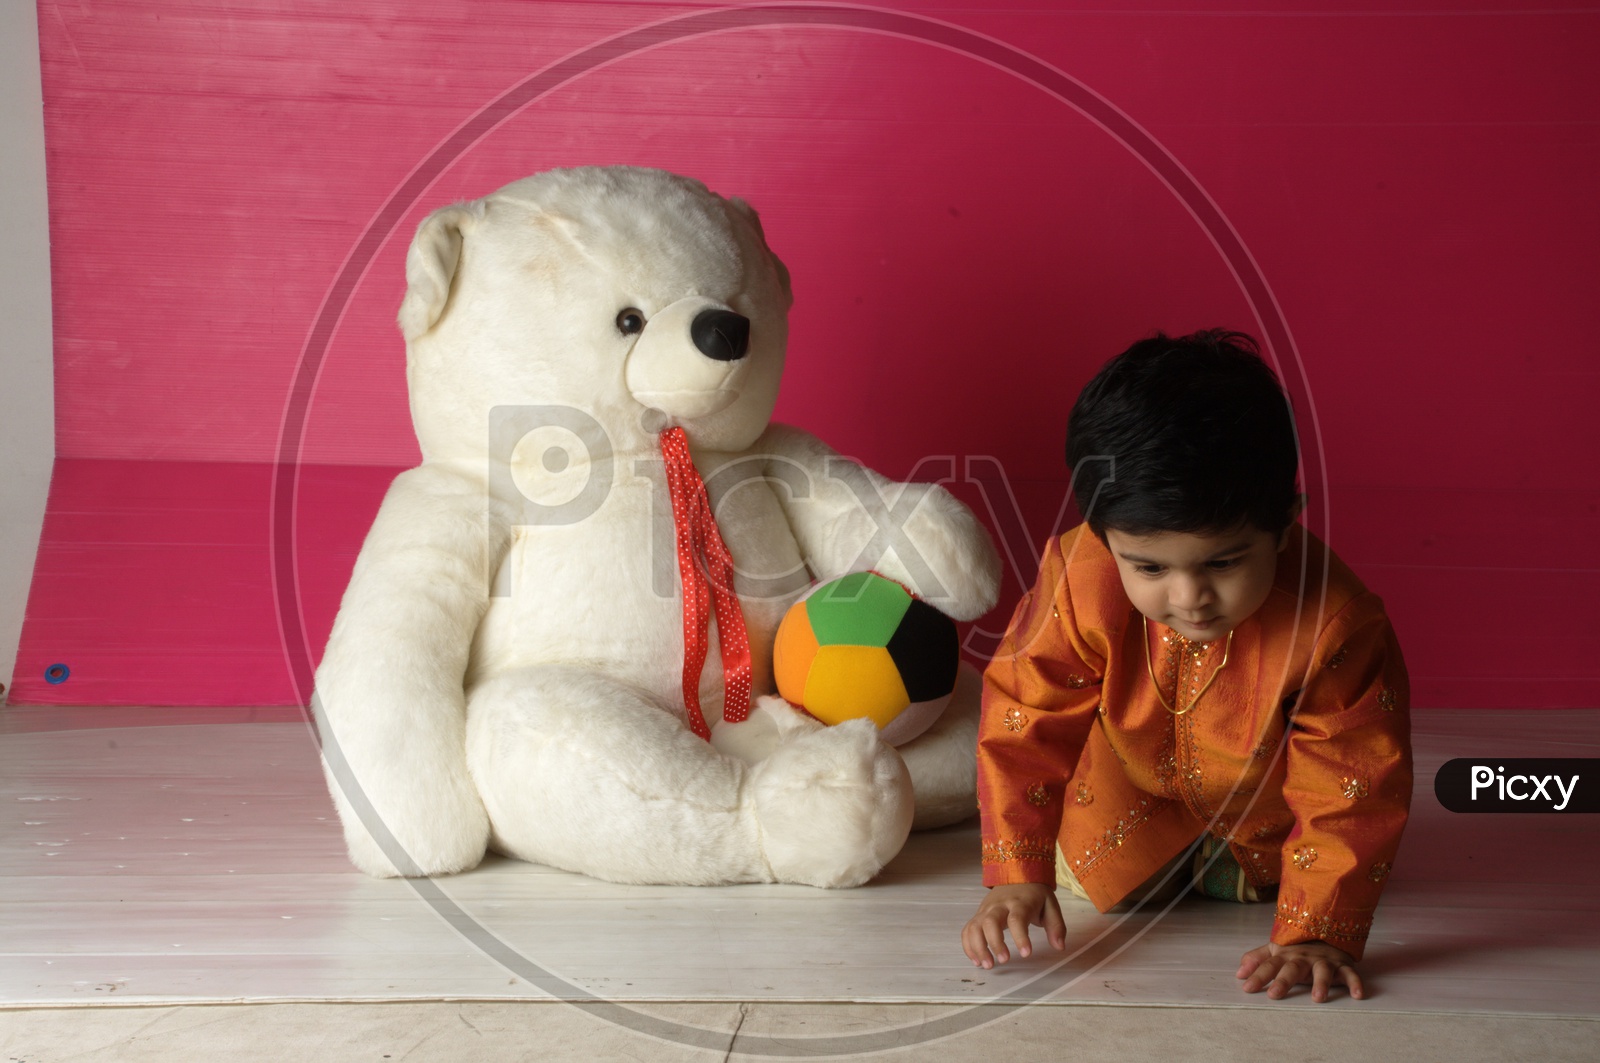 Indian Kid with a white teddy/soft toy